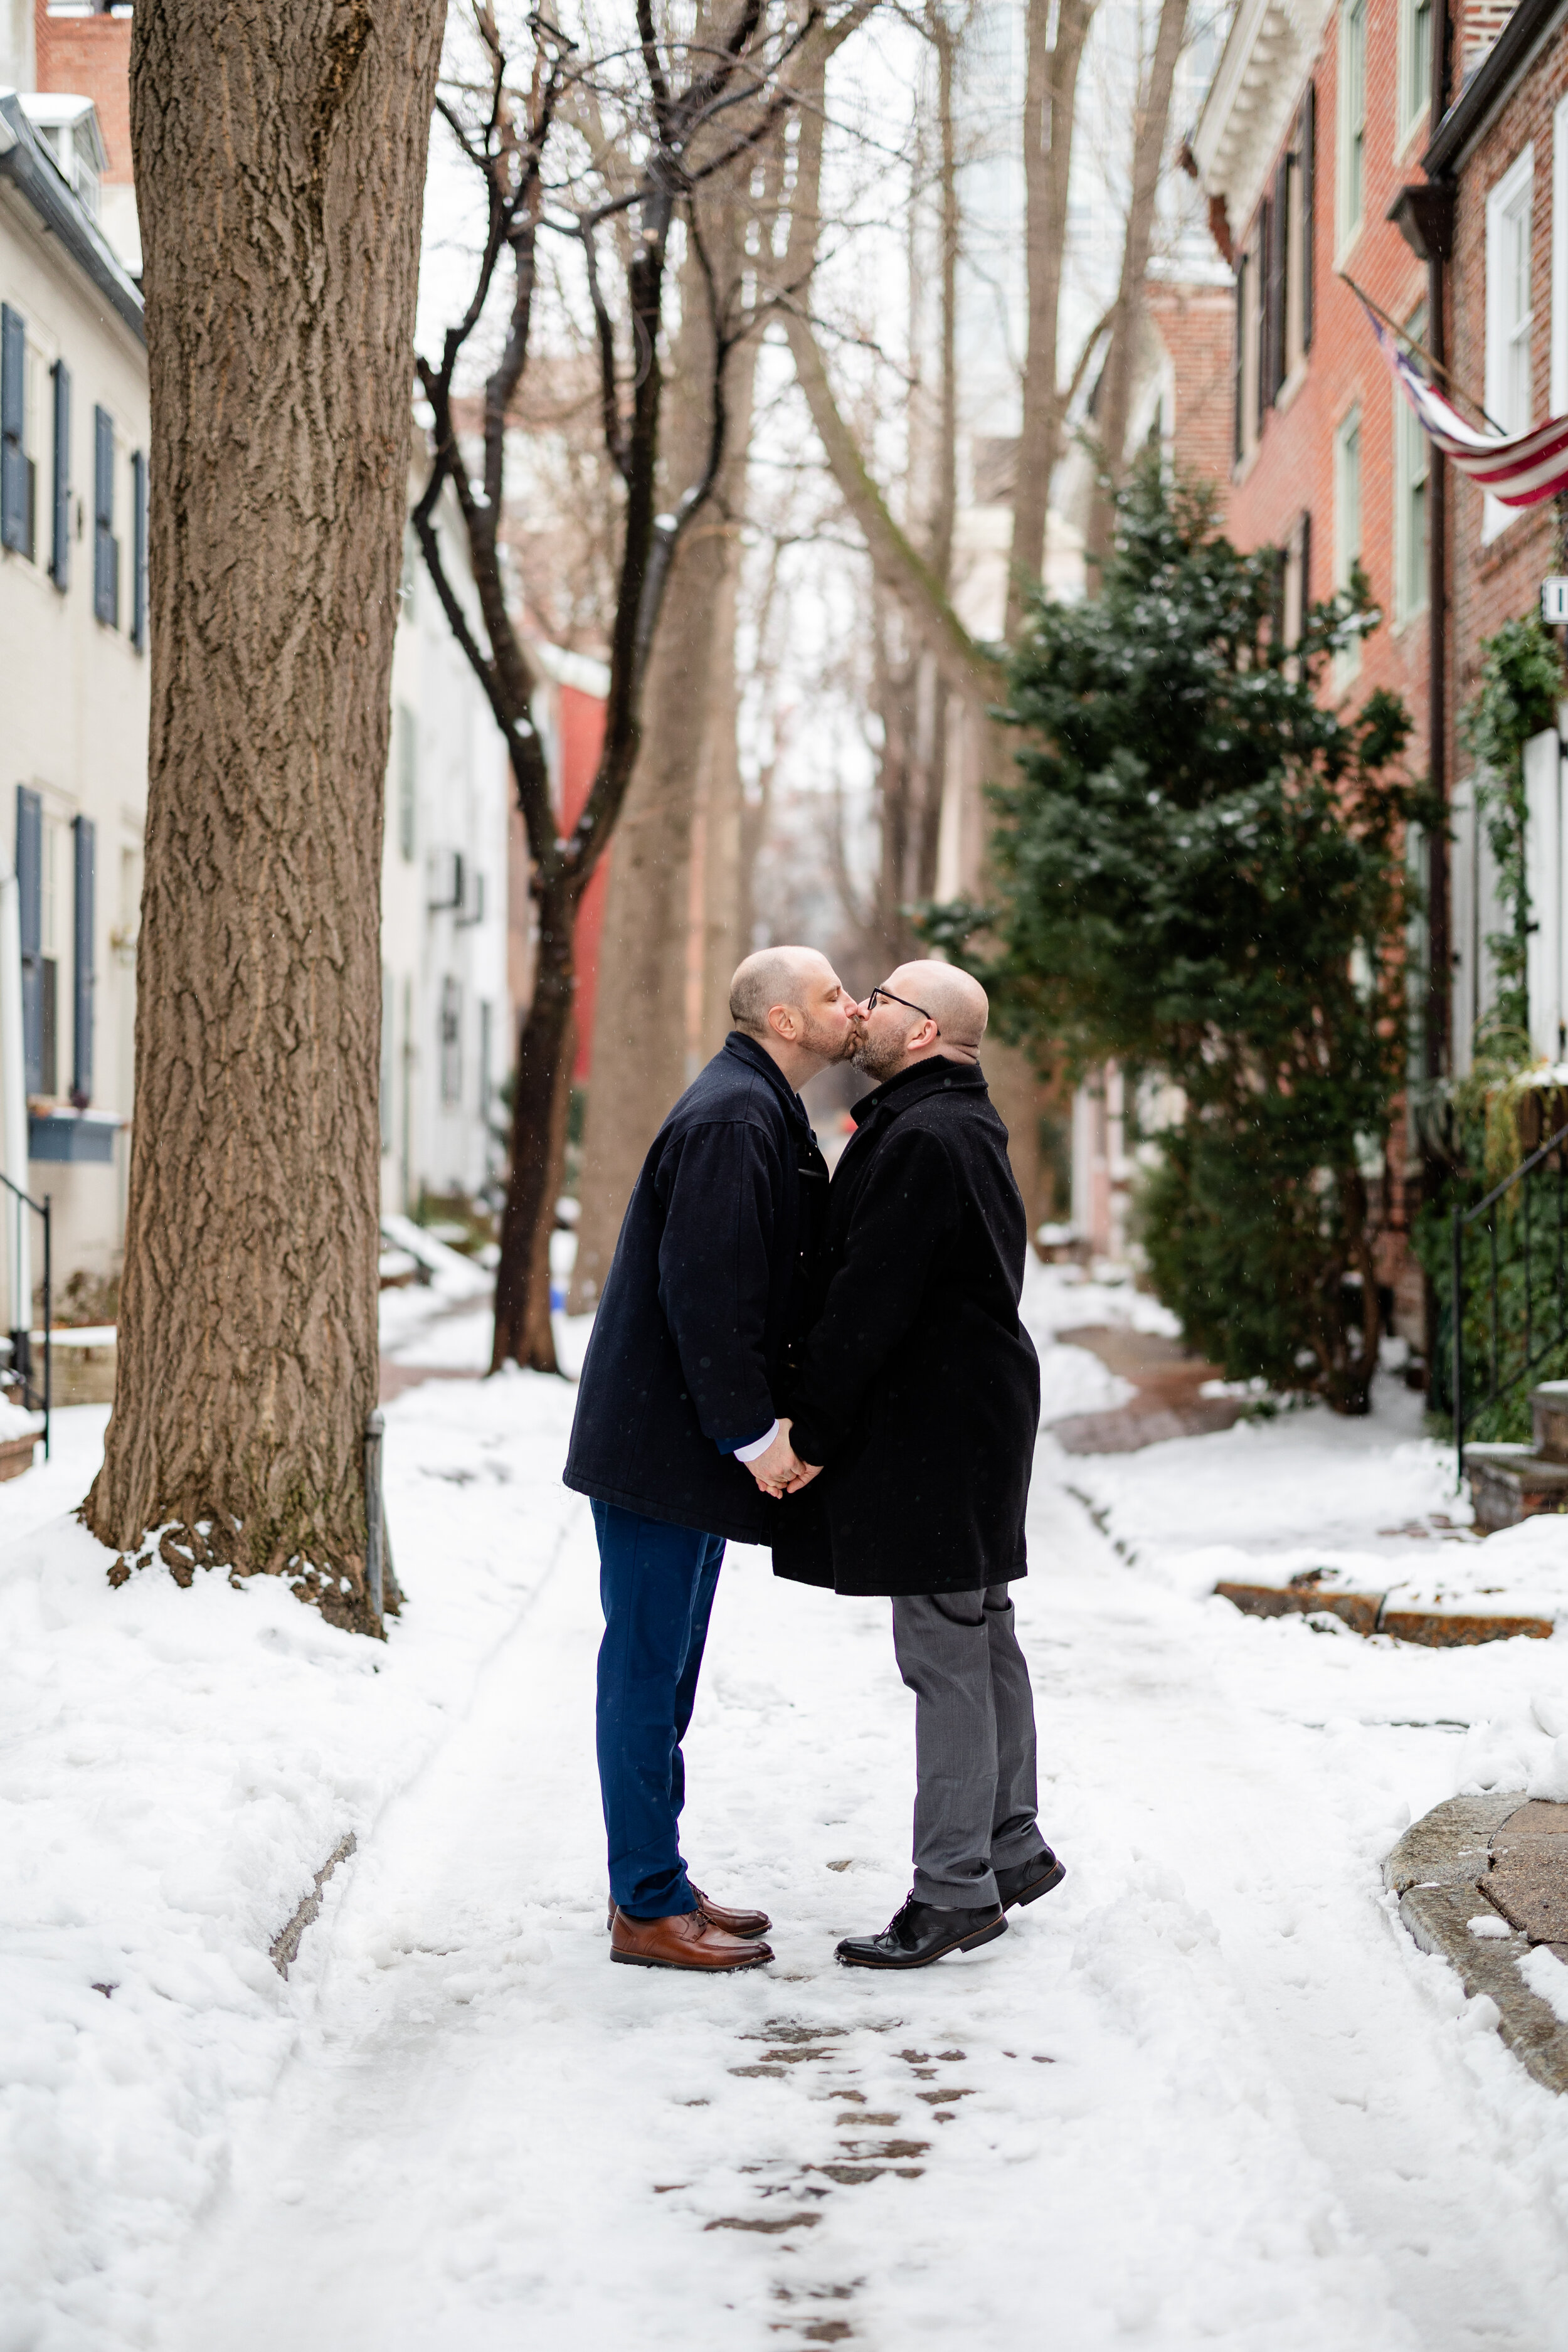 Curtis-and-Bill-Snowy-Vaux-Philly-Elopement-234.jpg